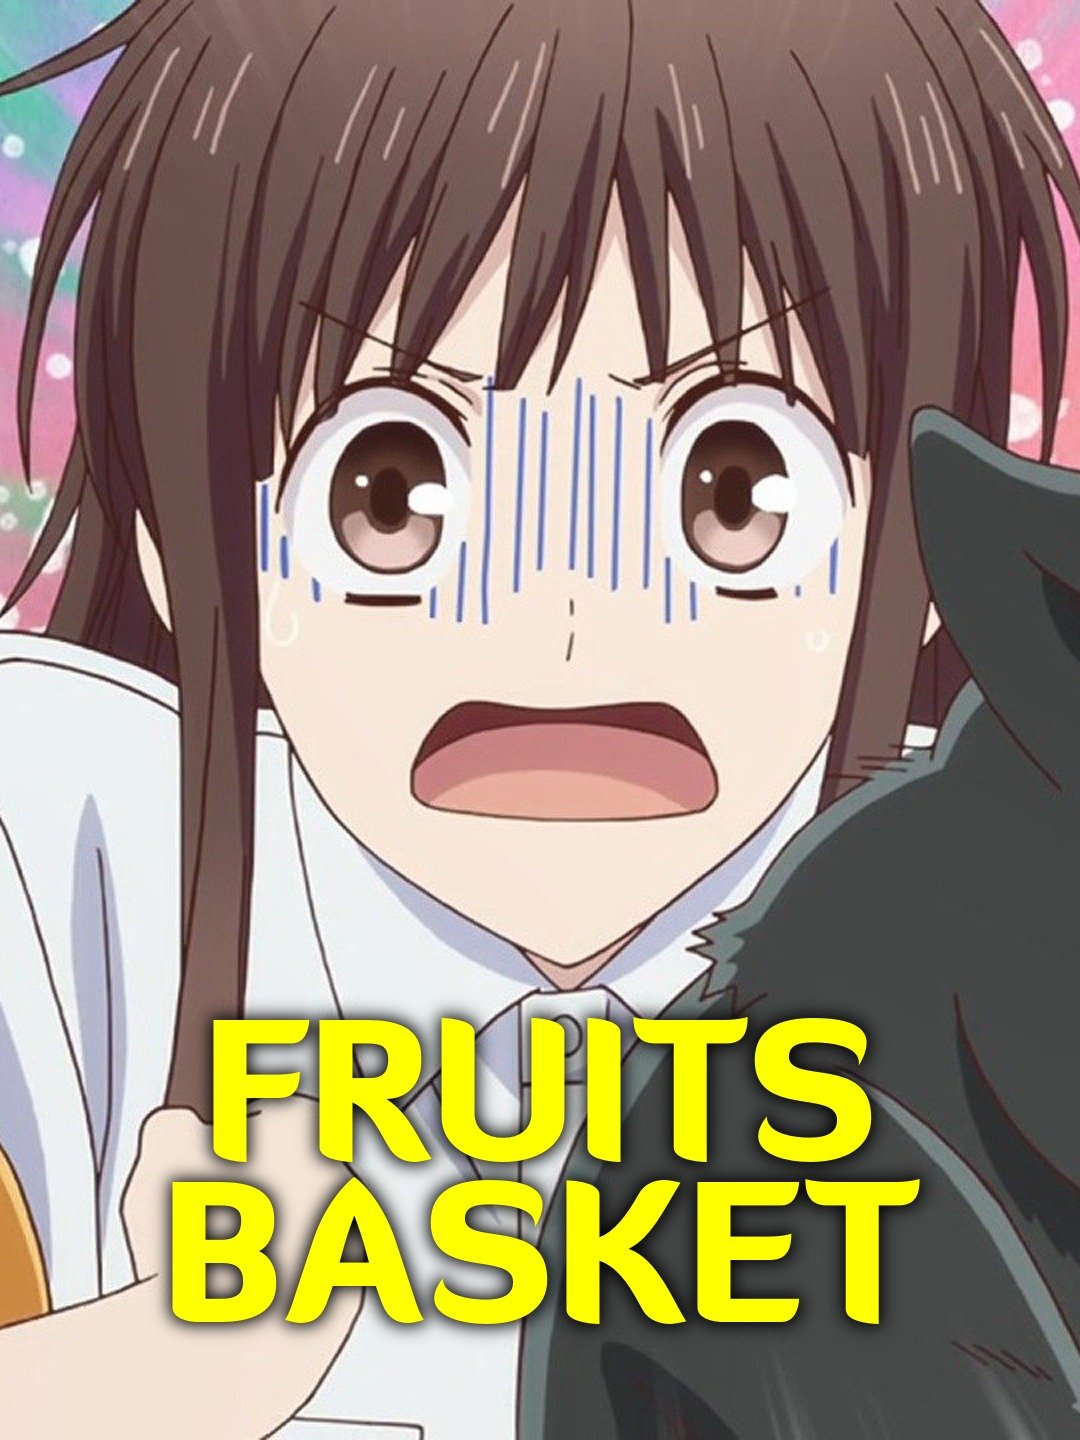 Fruits Basket Anime Gets Compilation Film With Prequel, Epilogue Scenes in  February - News - Anime News Network